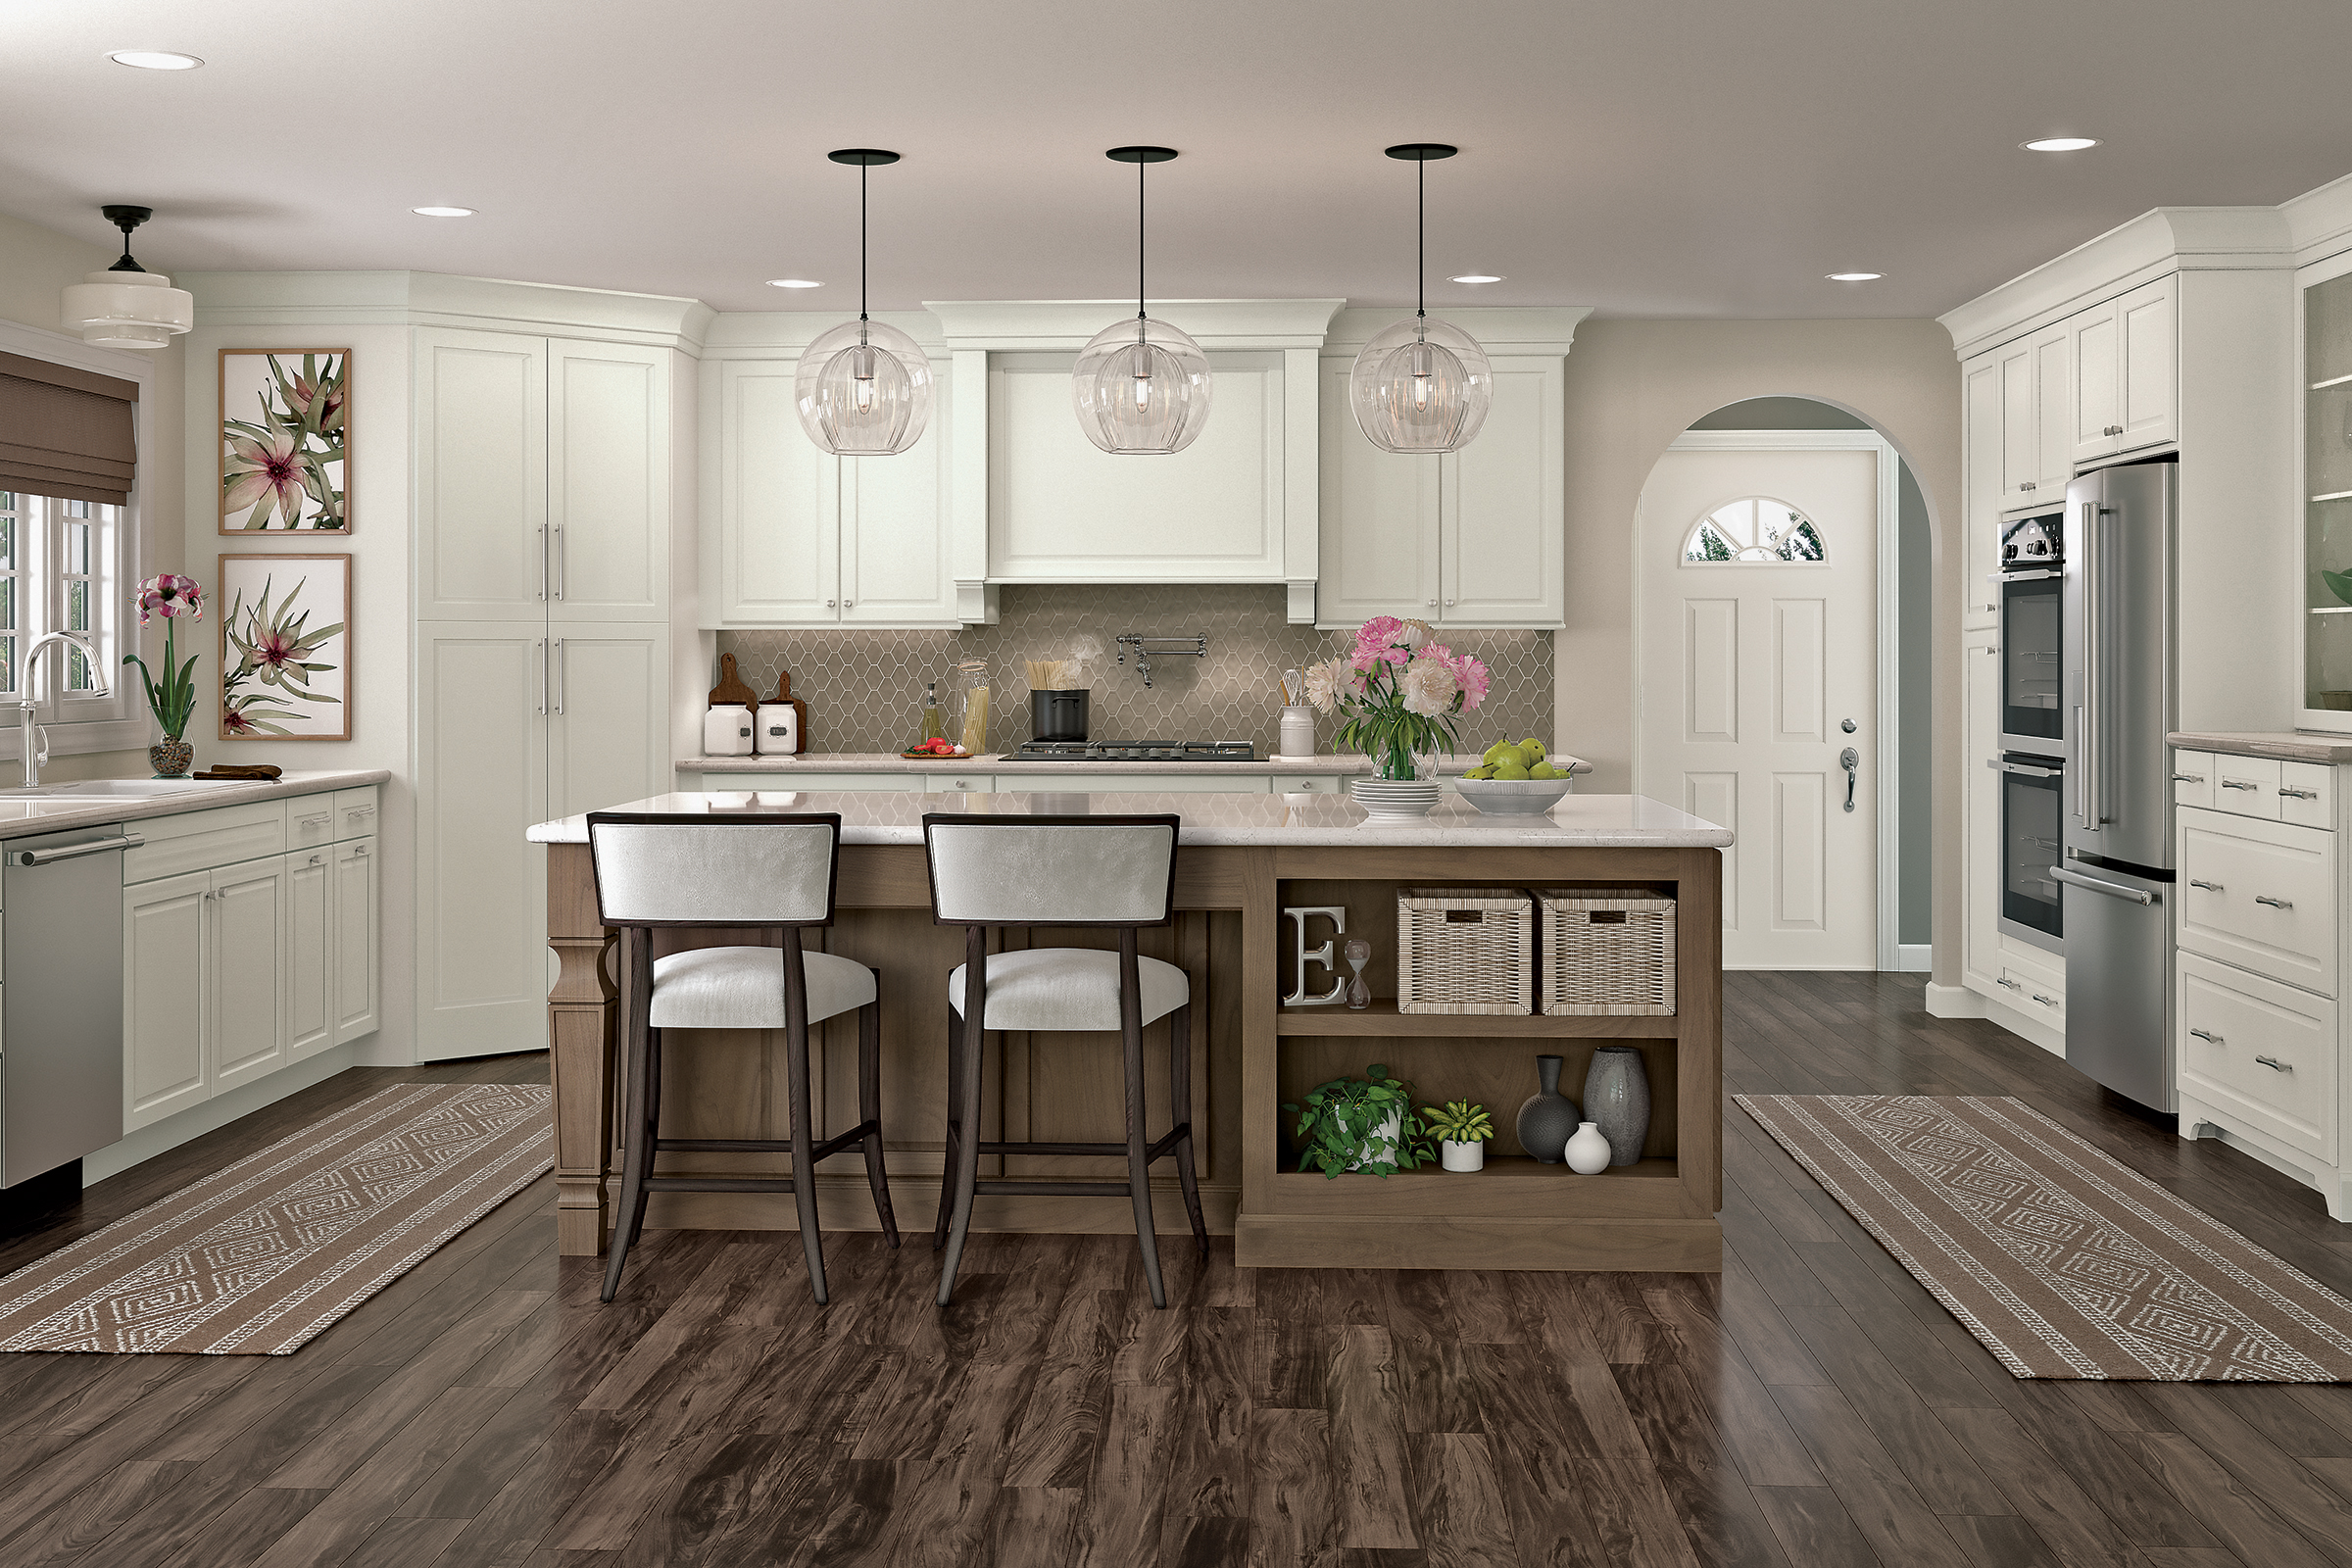 KraftMaid white kitchen cabinets with contrasting island.